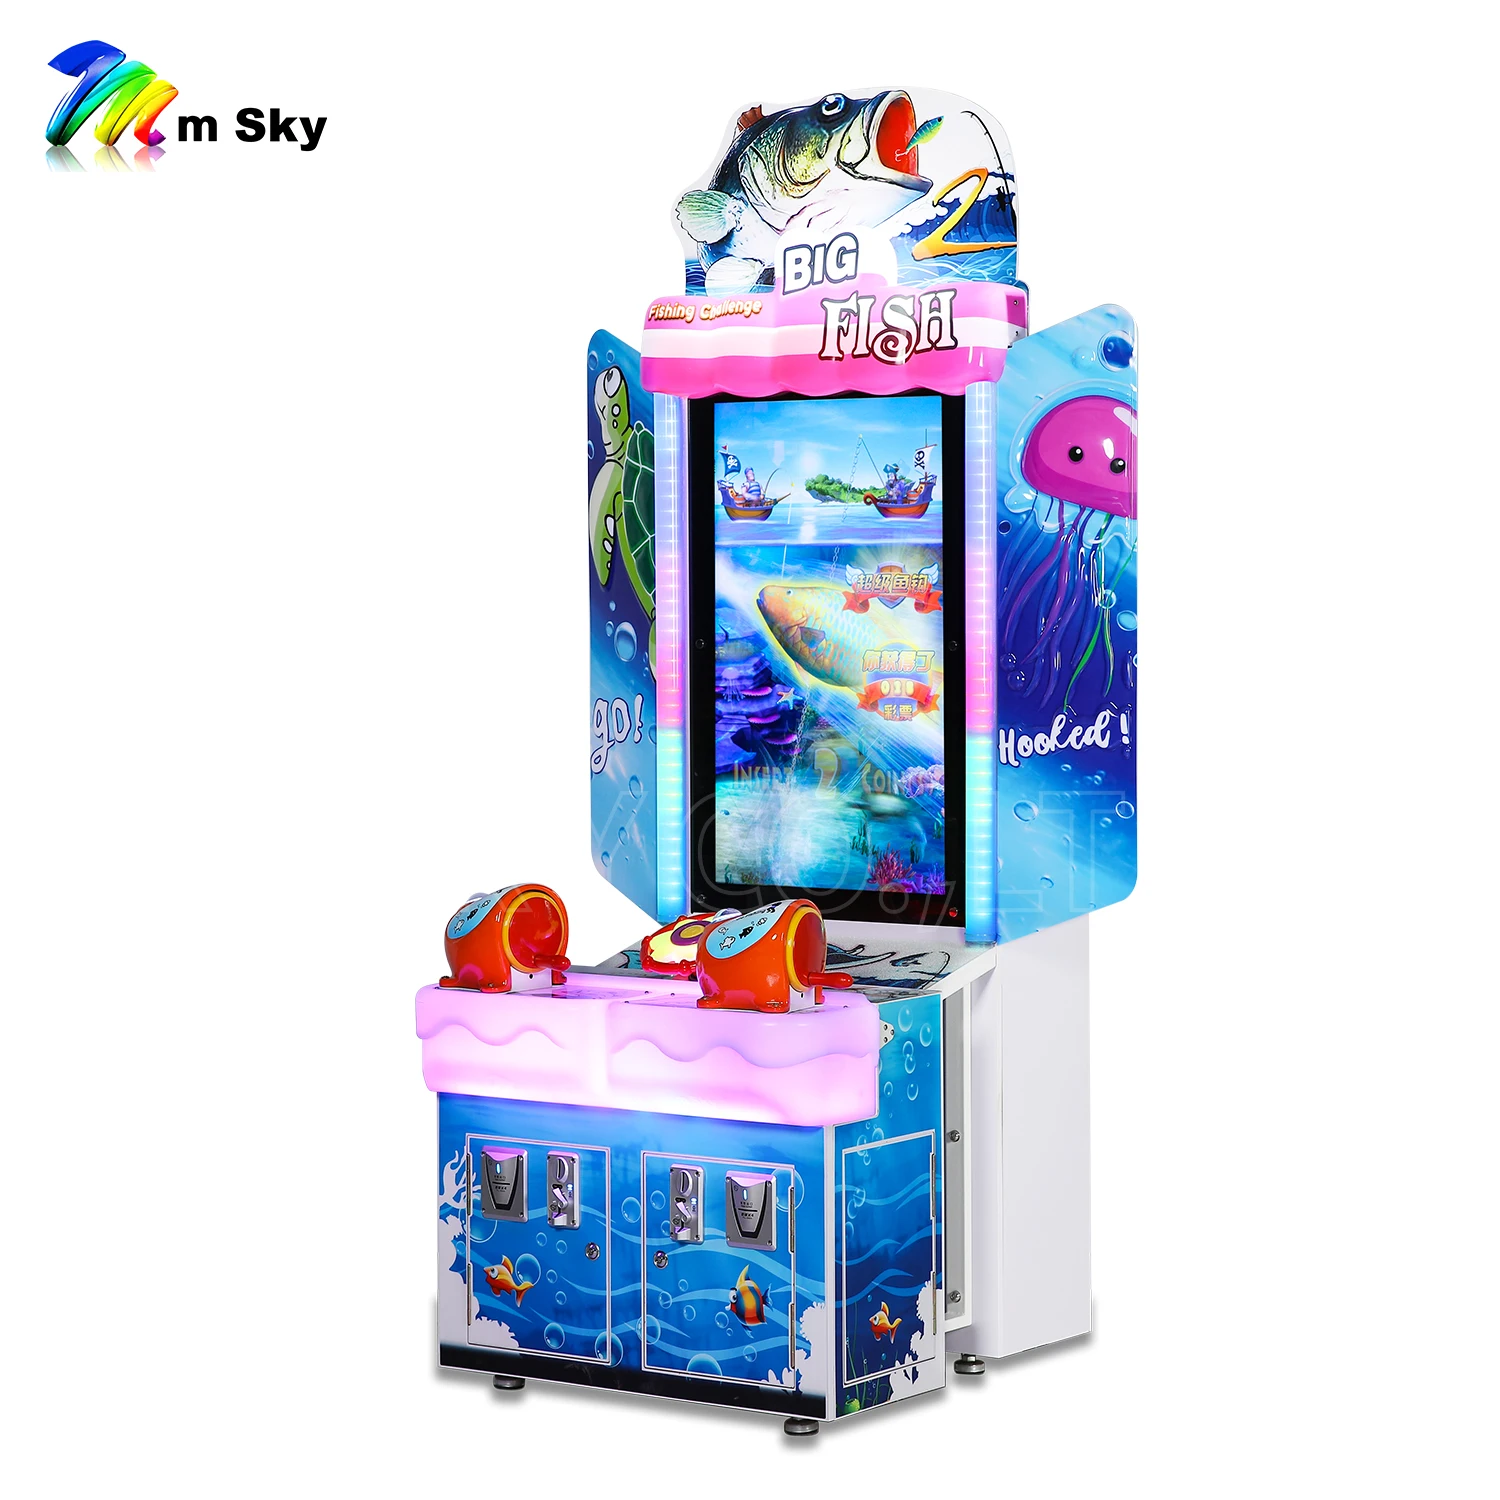 

Fishing game KA-810 coin operated arcade games for kids indoor game machine kiddie rides